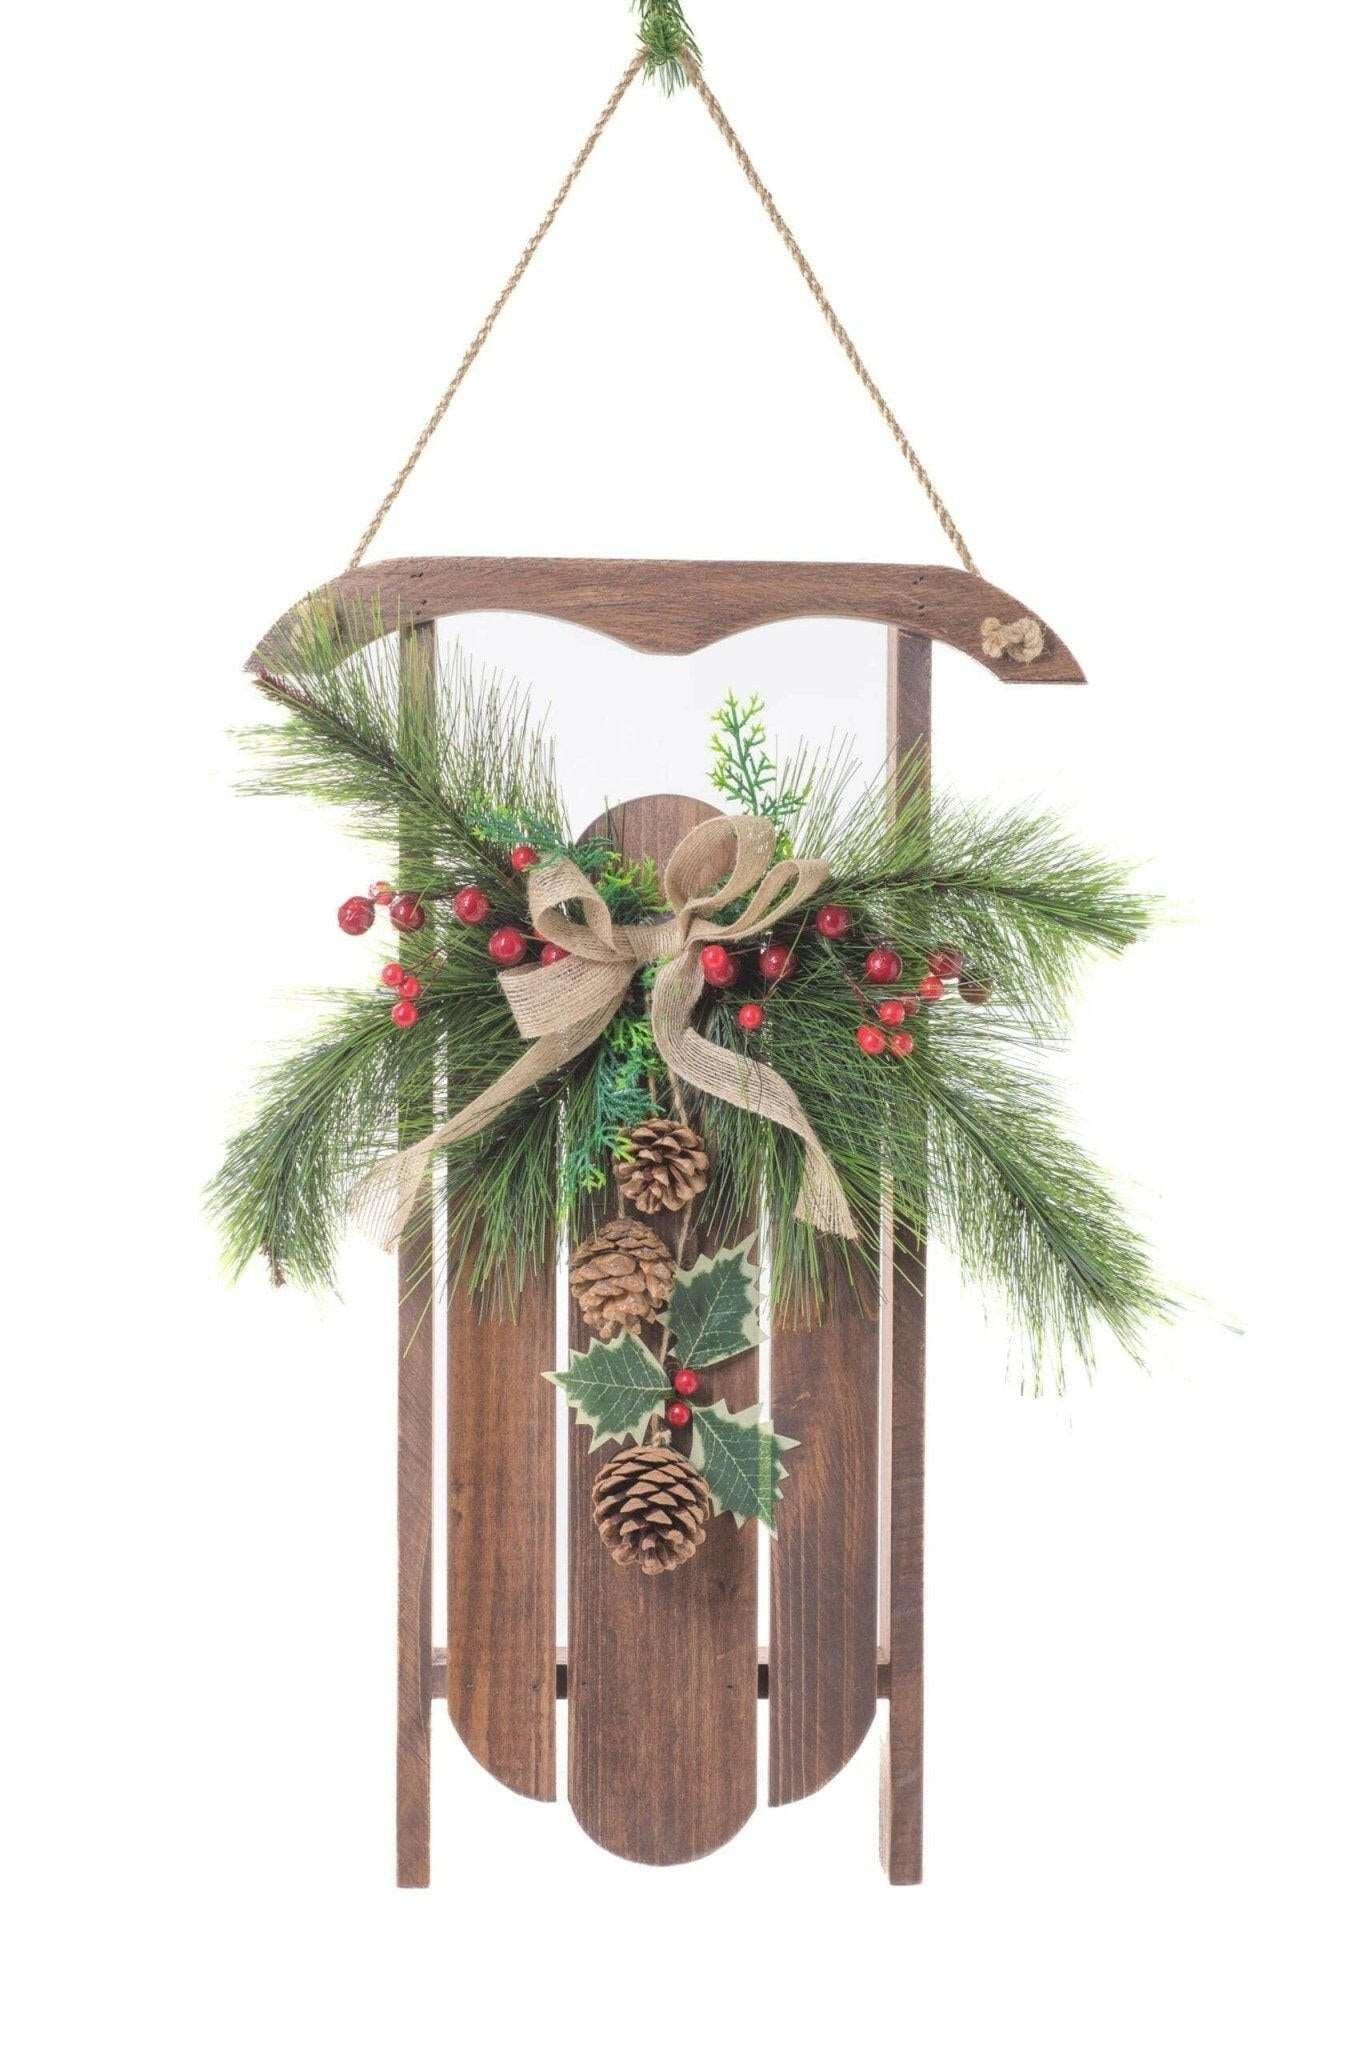 BROWN/GREEN WOOD HANGING SLED SLED WITH SPRAY | Treasures of my HeART